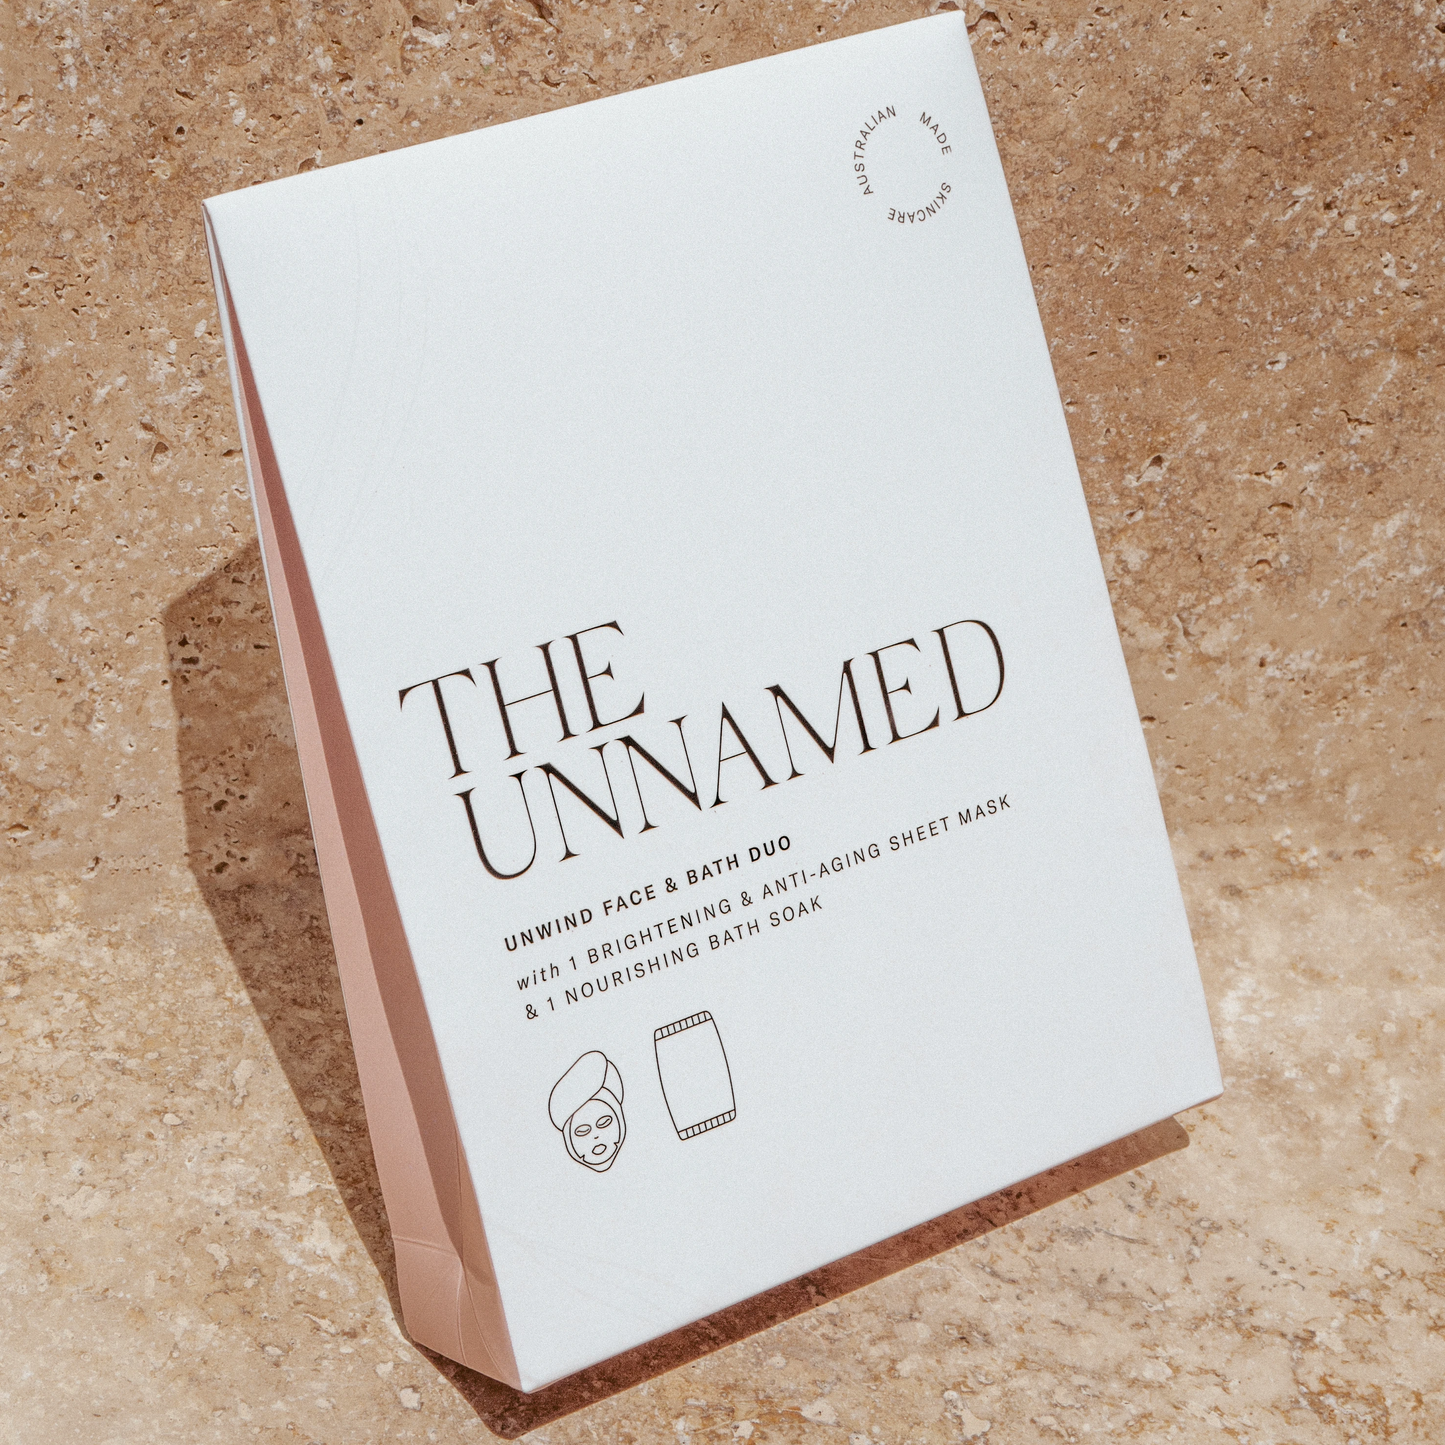 
                  
                    The Unnamed - Unwind Face & Bath Duo - Vorfreude Stationery
                  
                